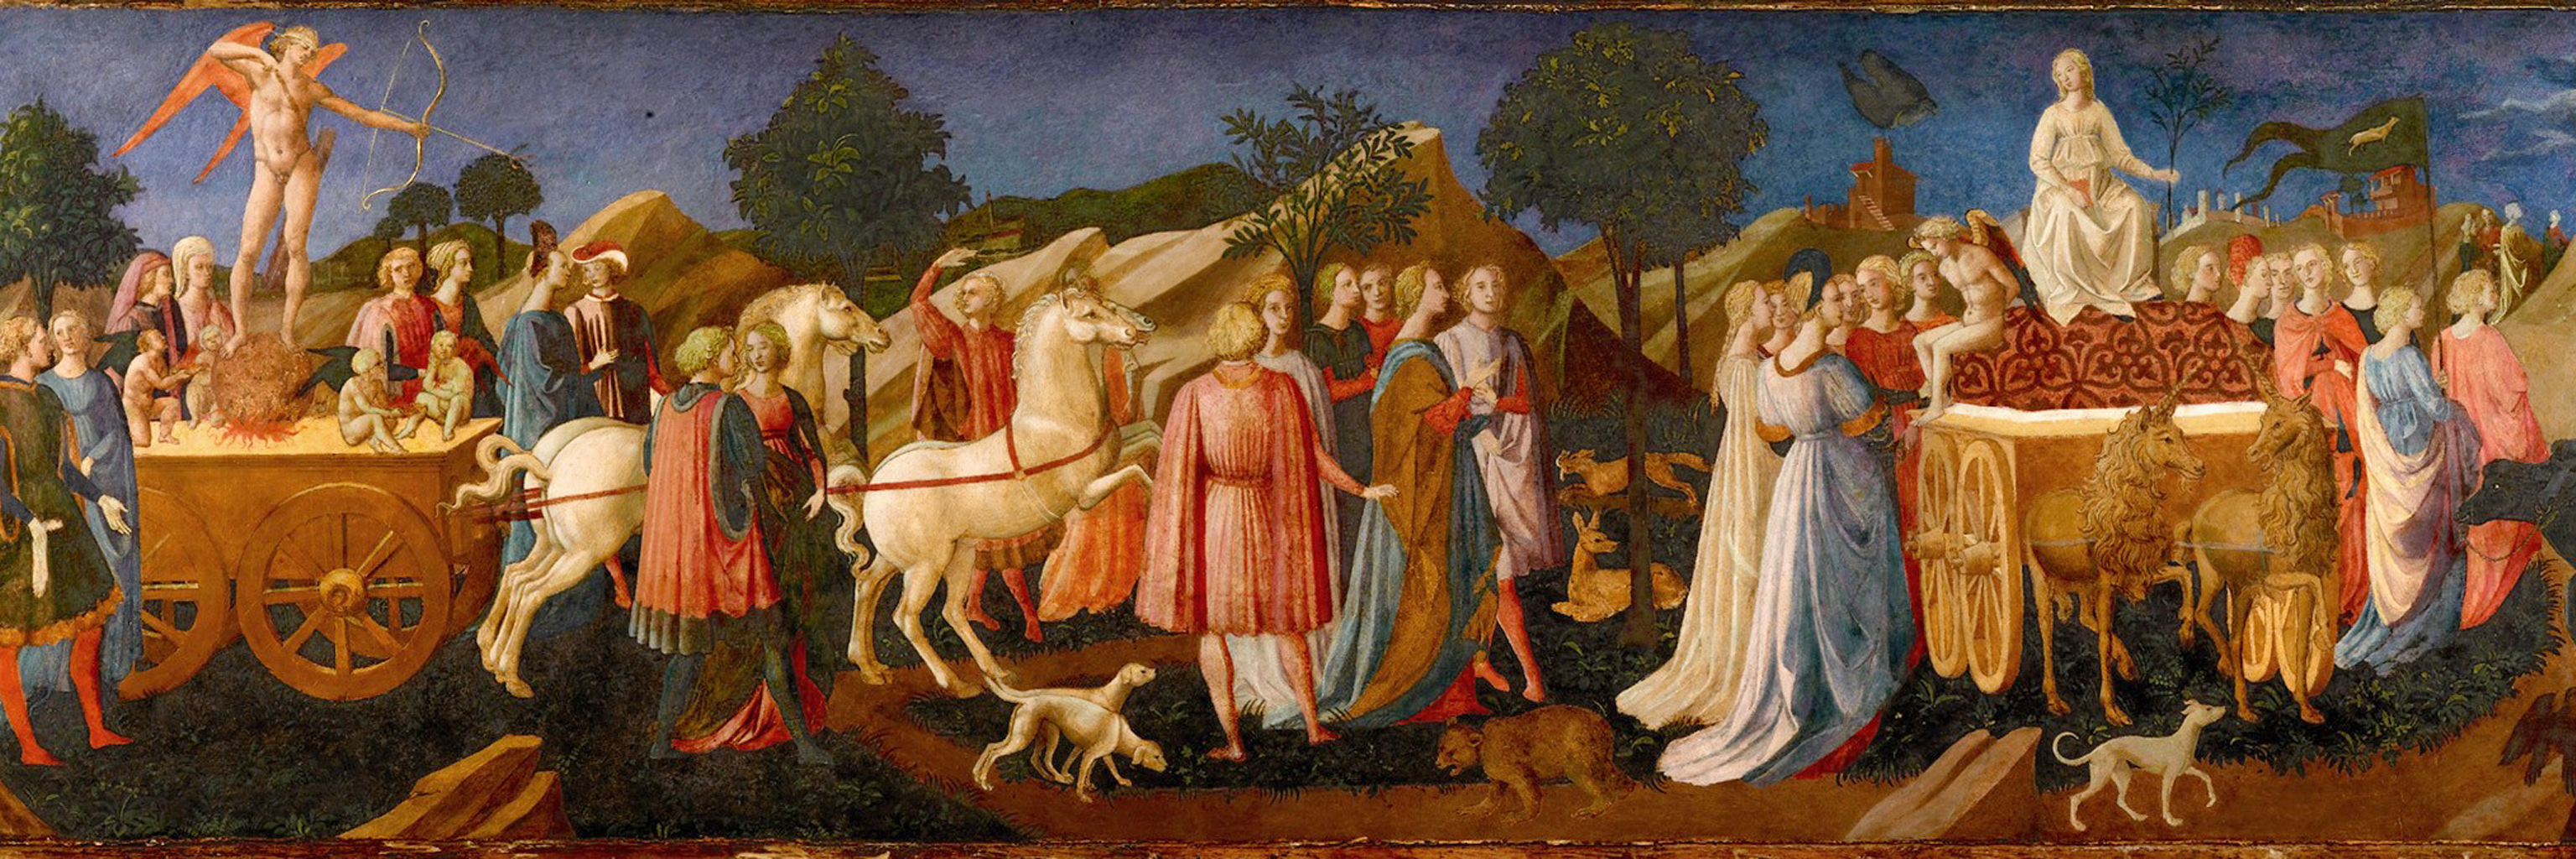 Cassone painting of Petrarch's Triumphs: Love, Chastity, and Death.